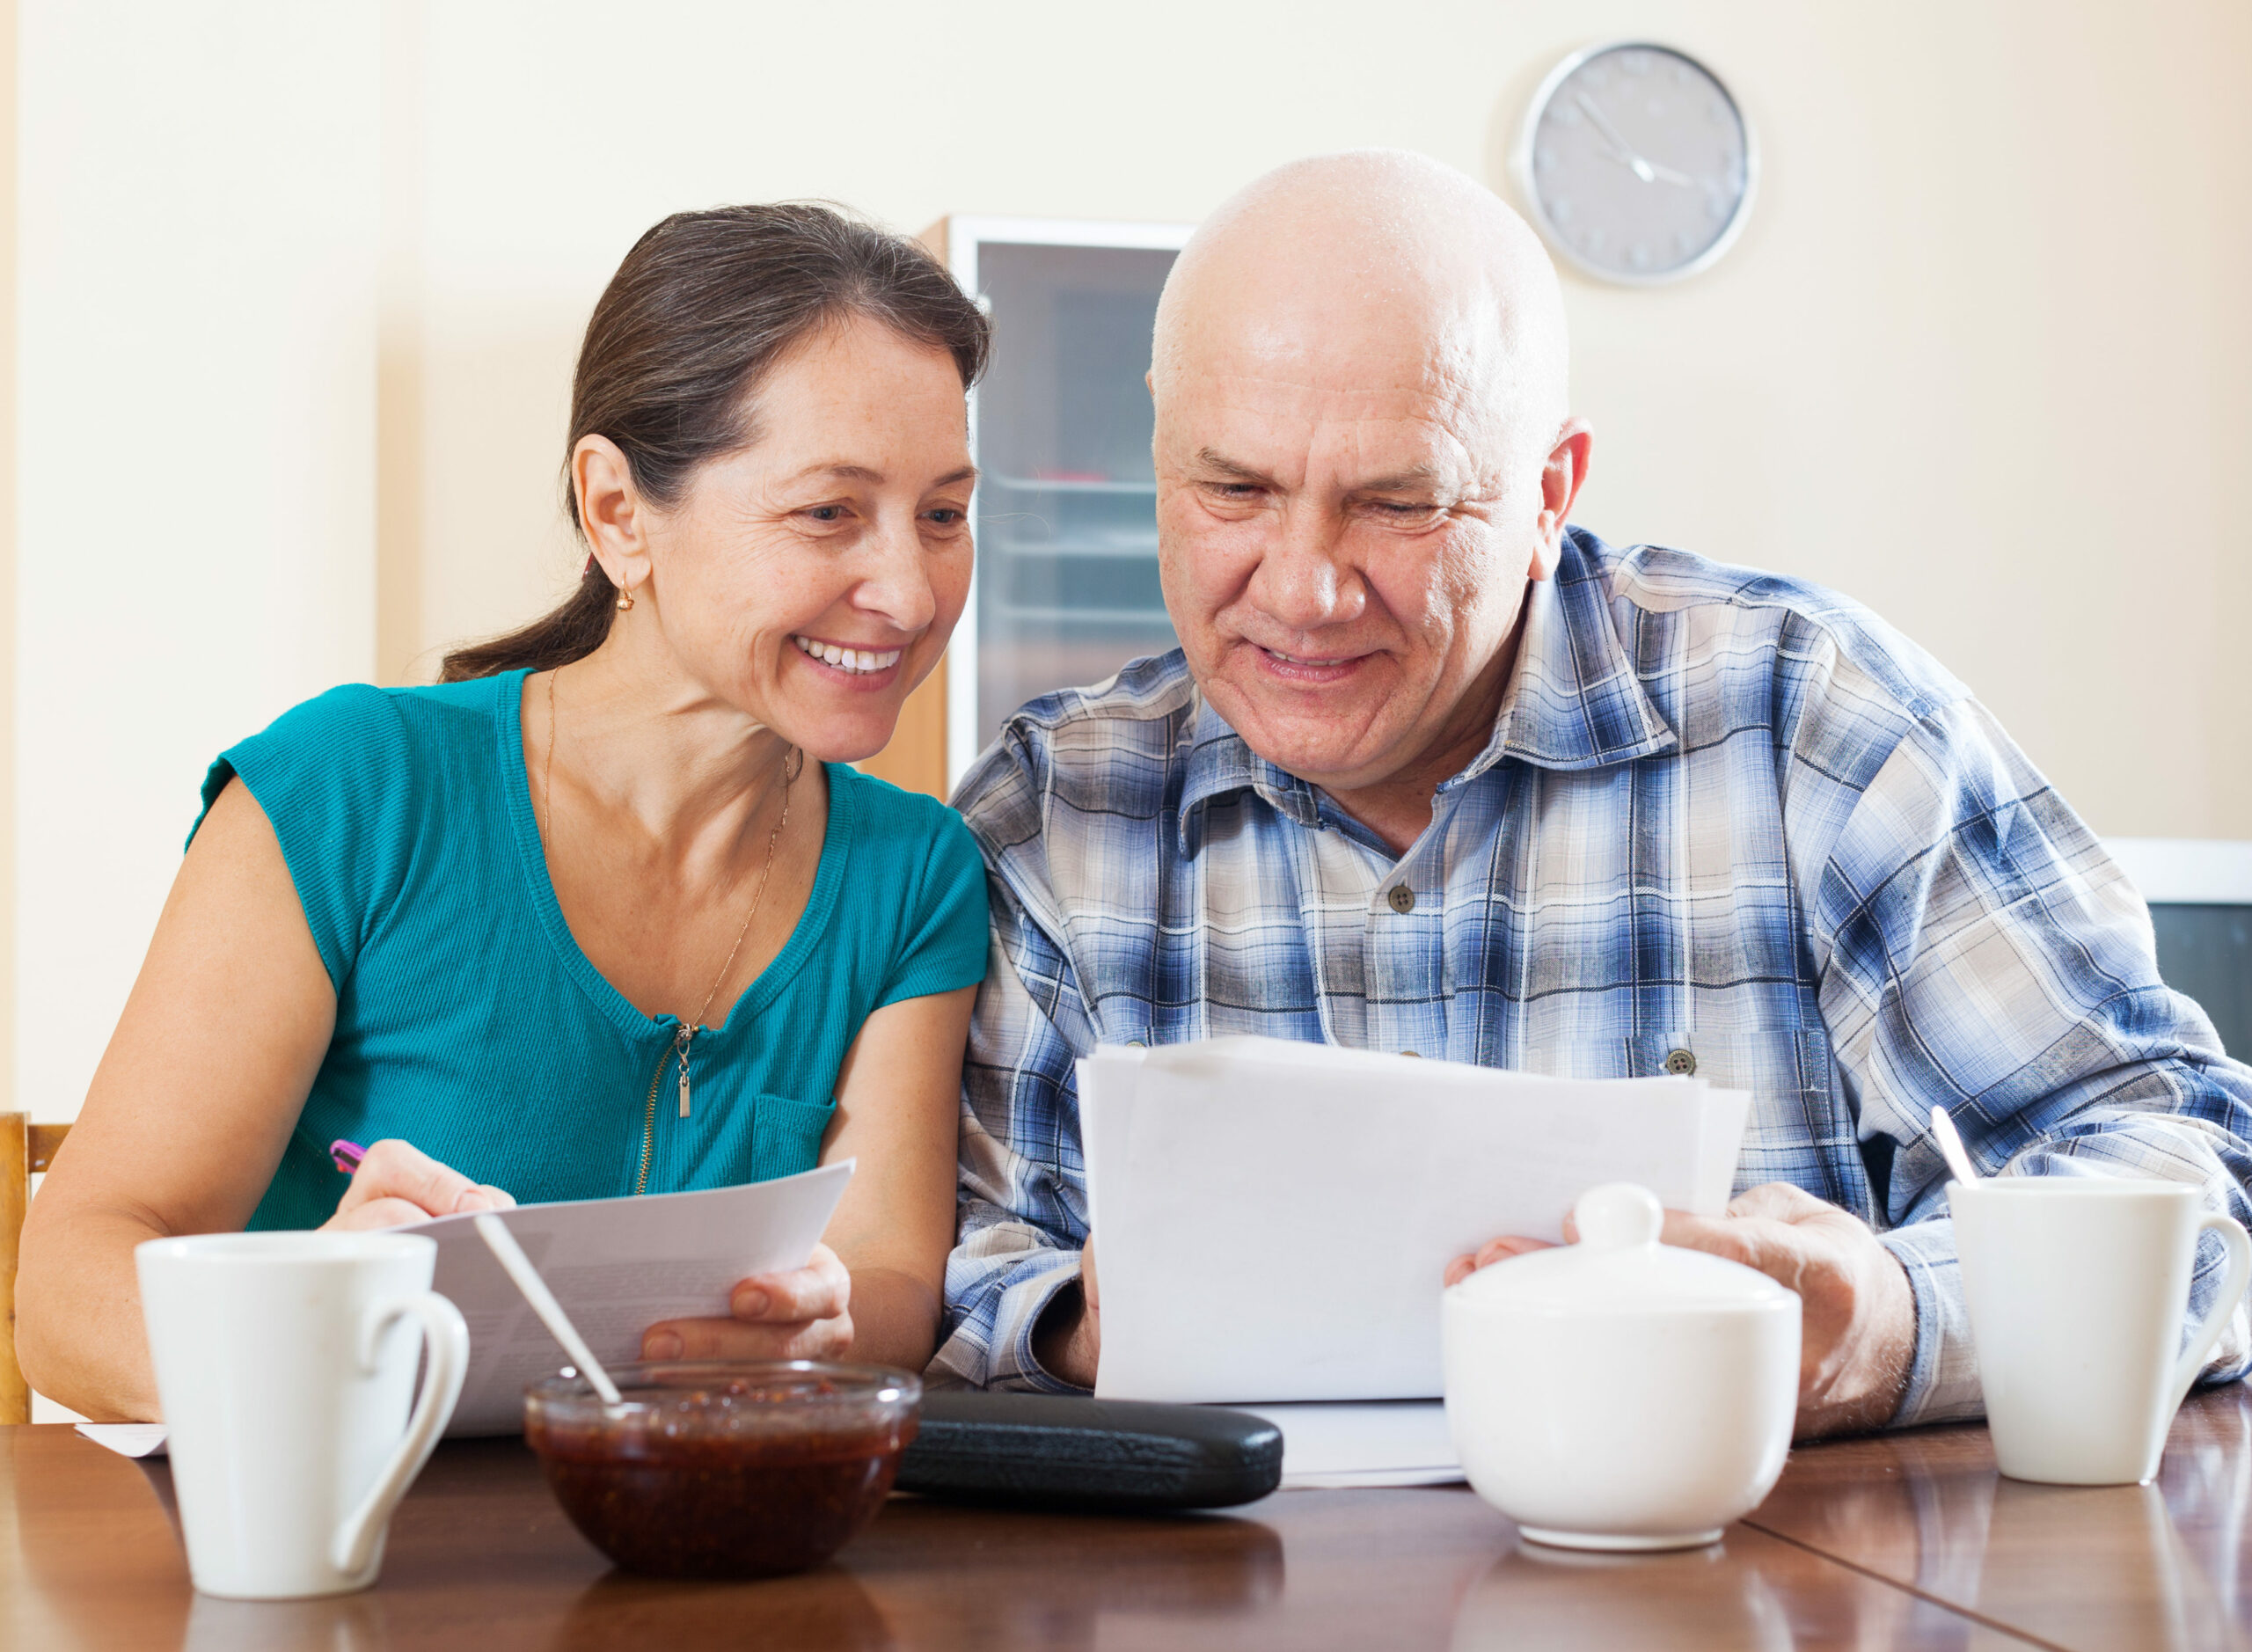 Smiling mature couple reading documents during tea